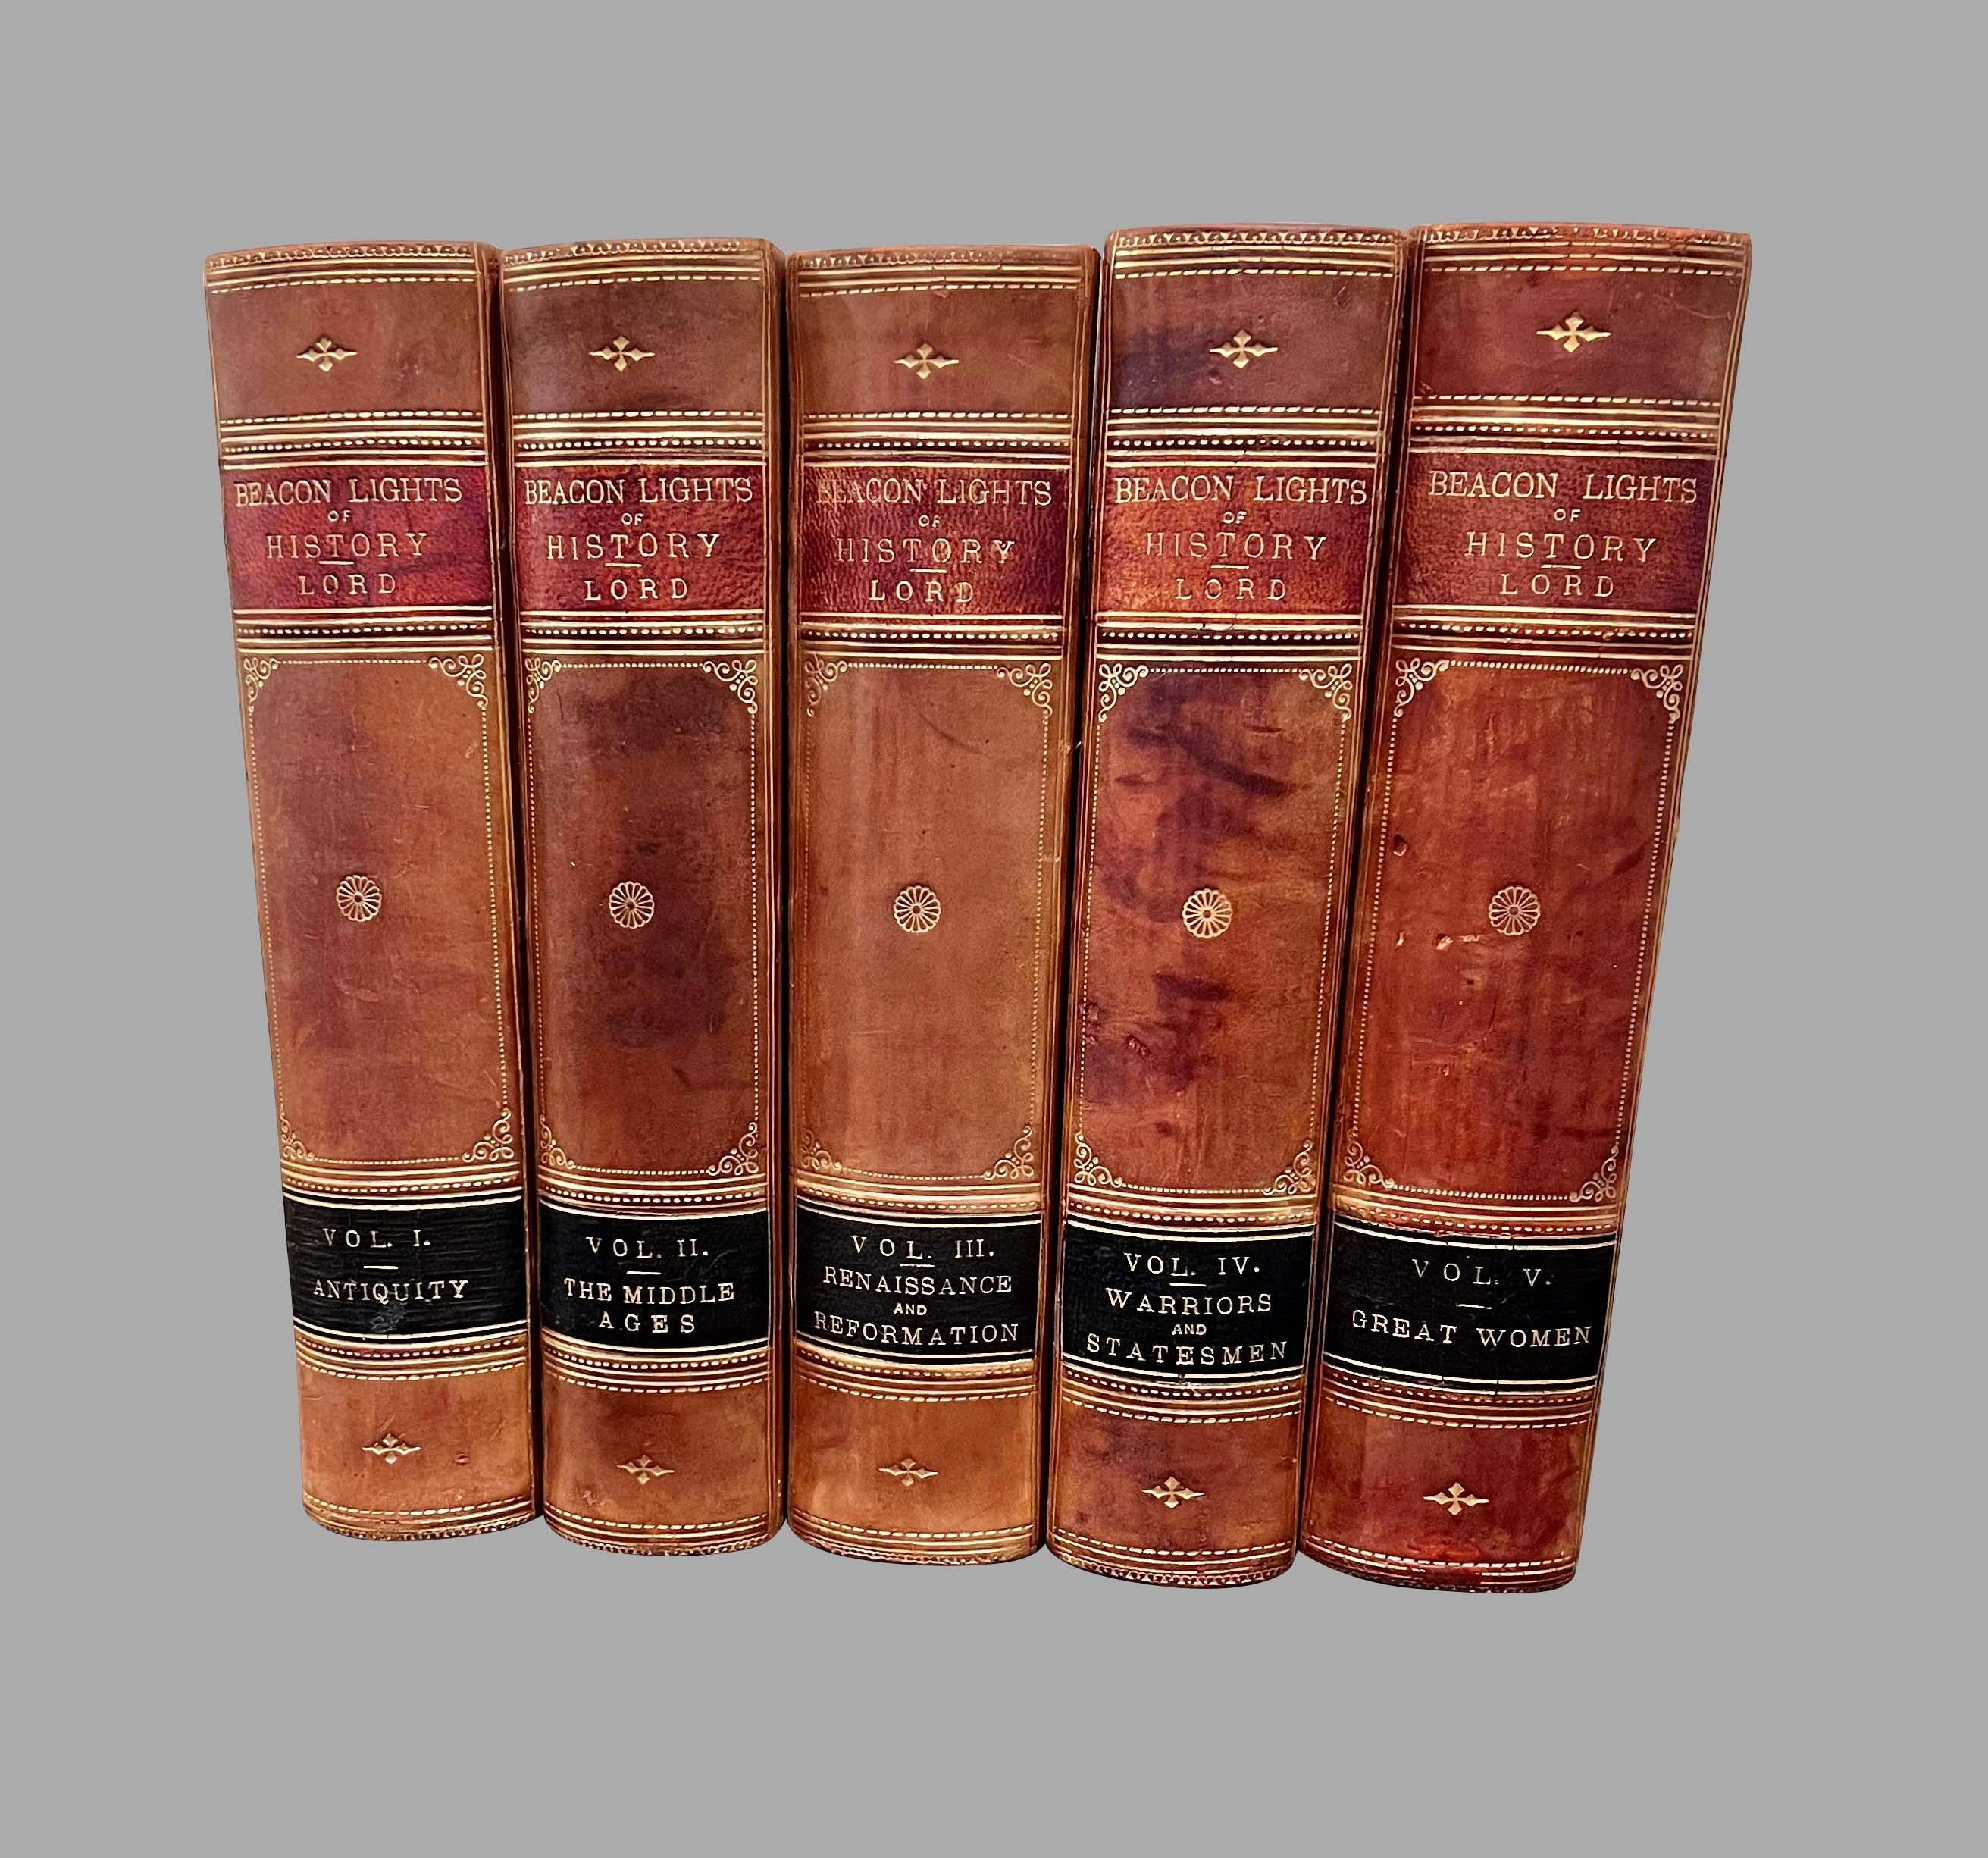 A five volume leather bound set titled 